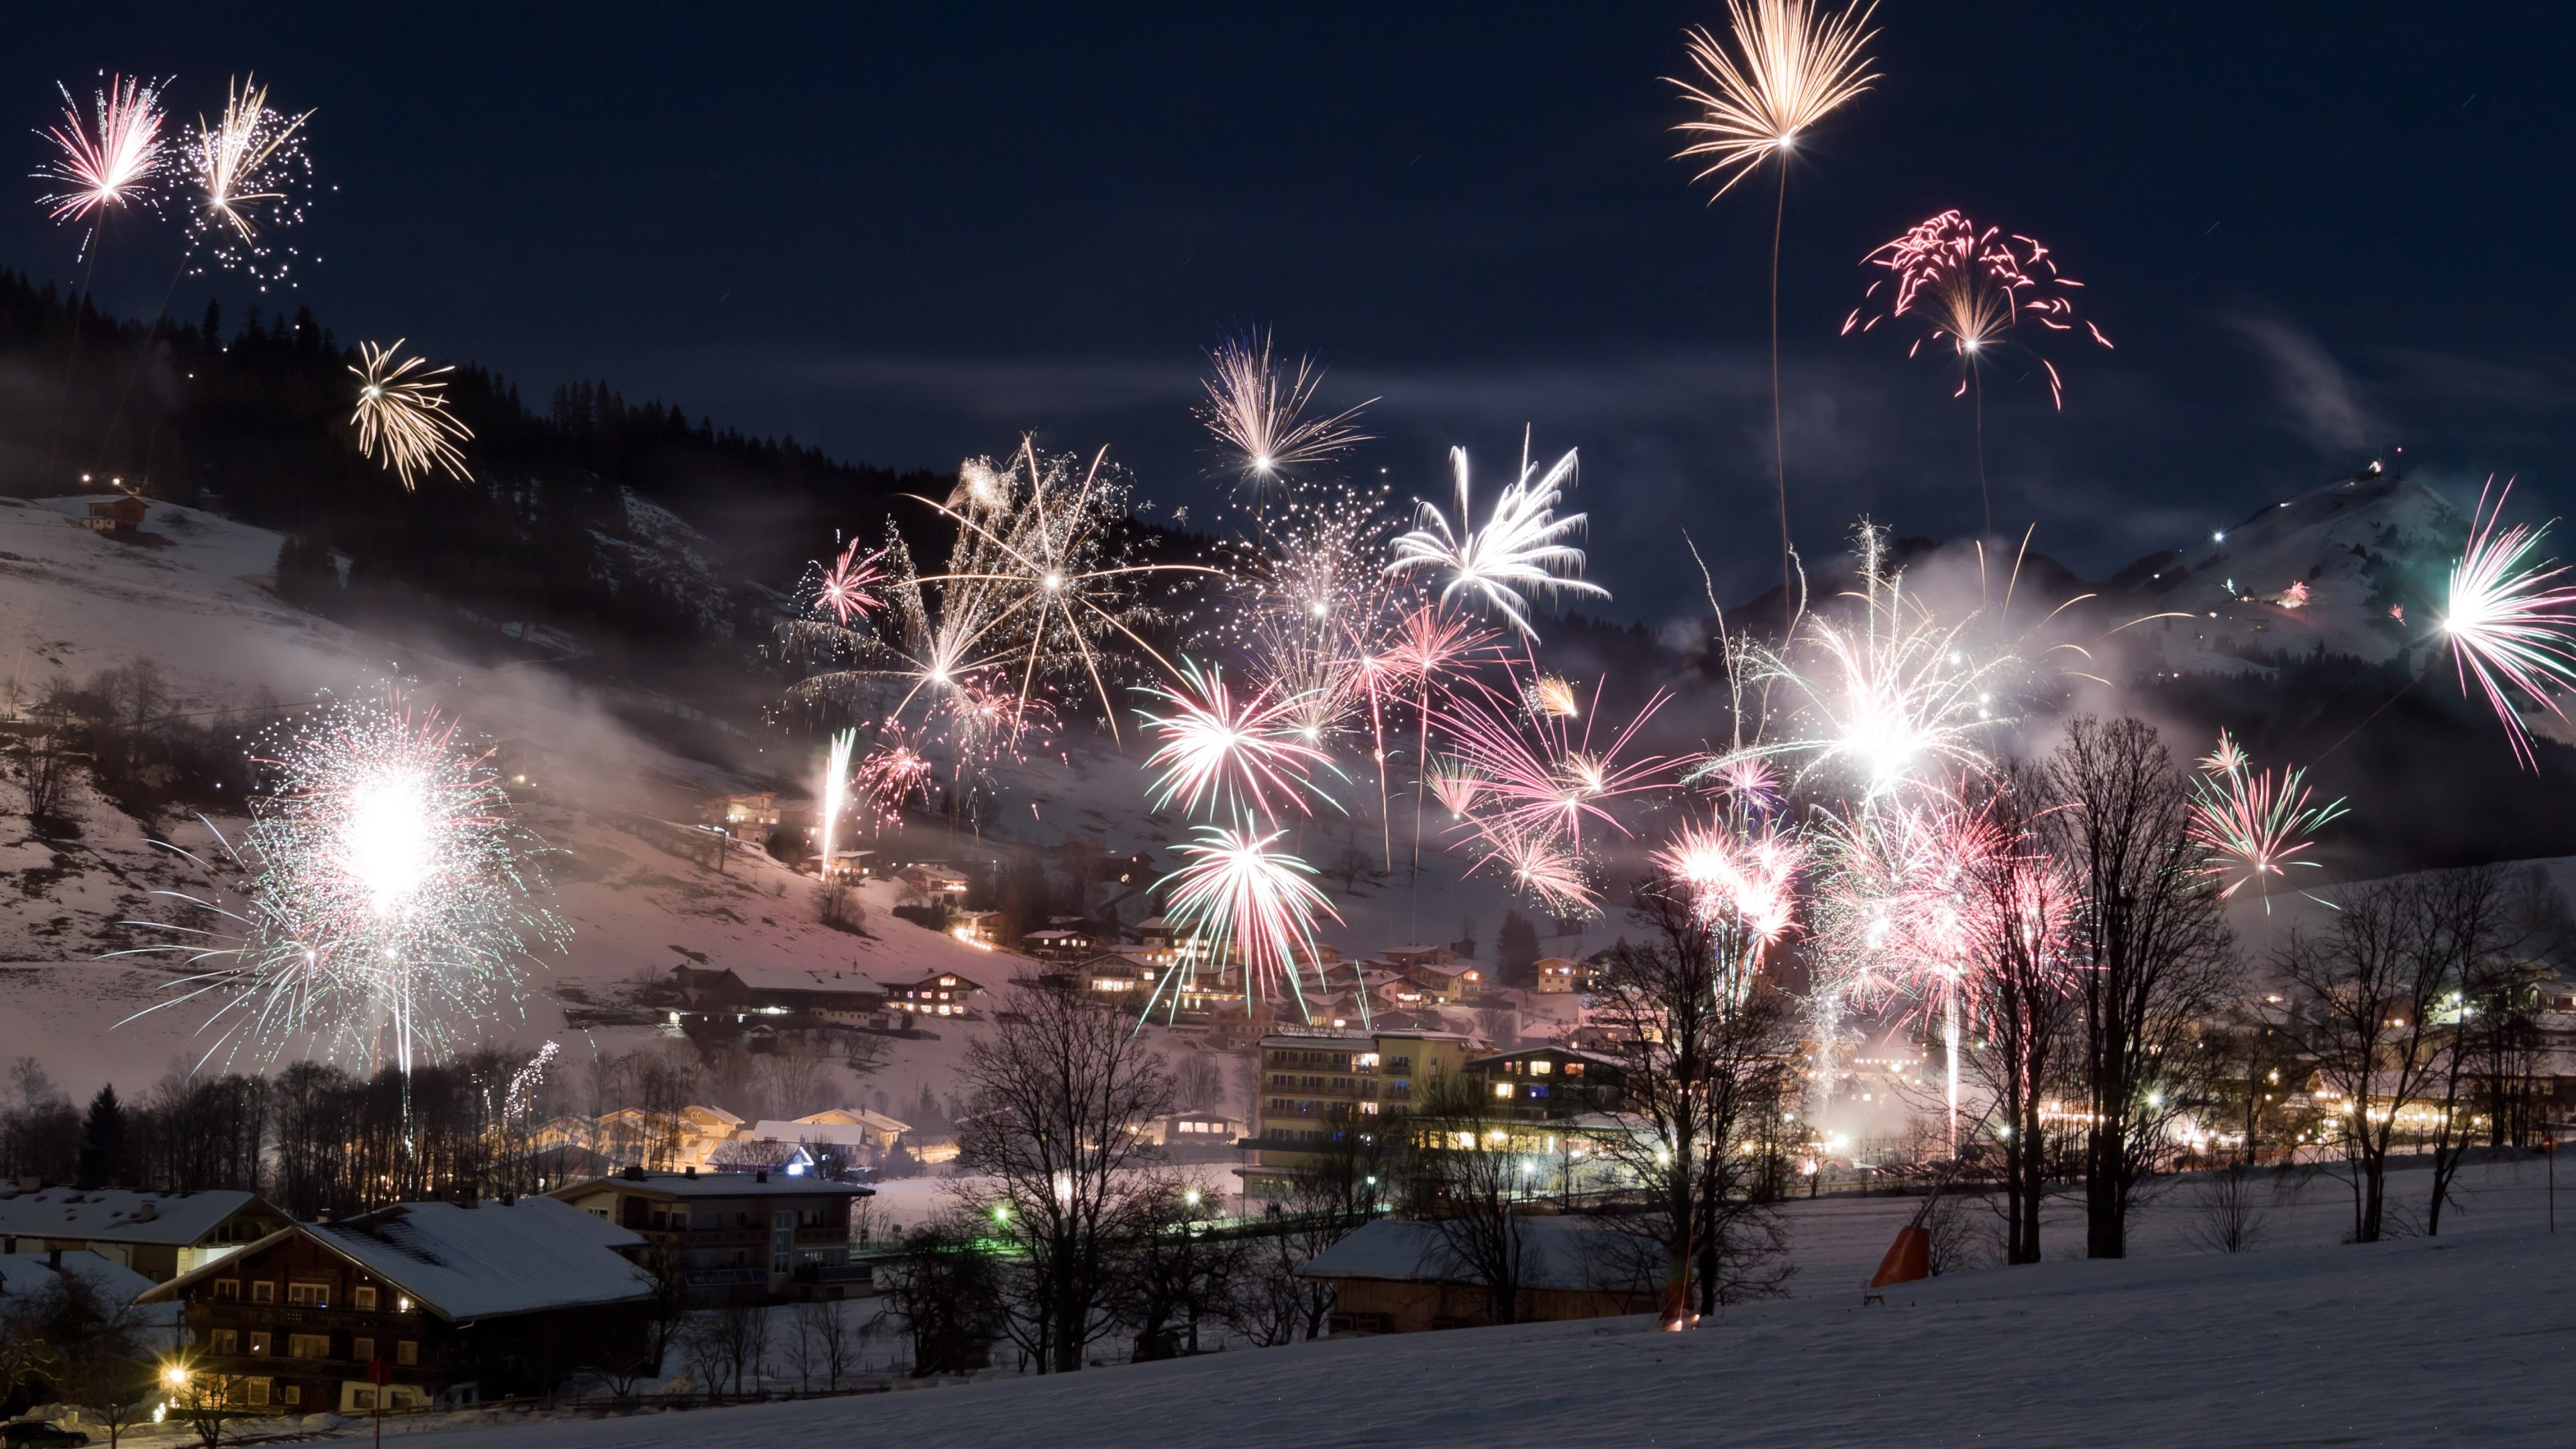 new video wallpaper,fireworks,nature,sky,new years day,night